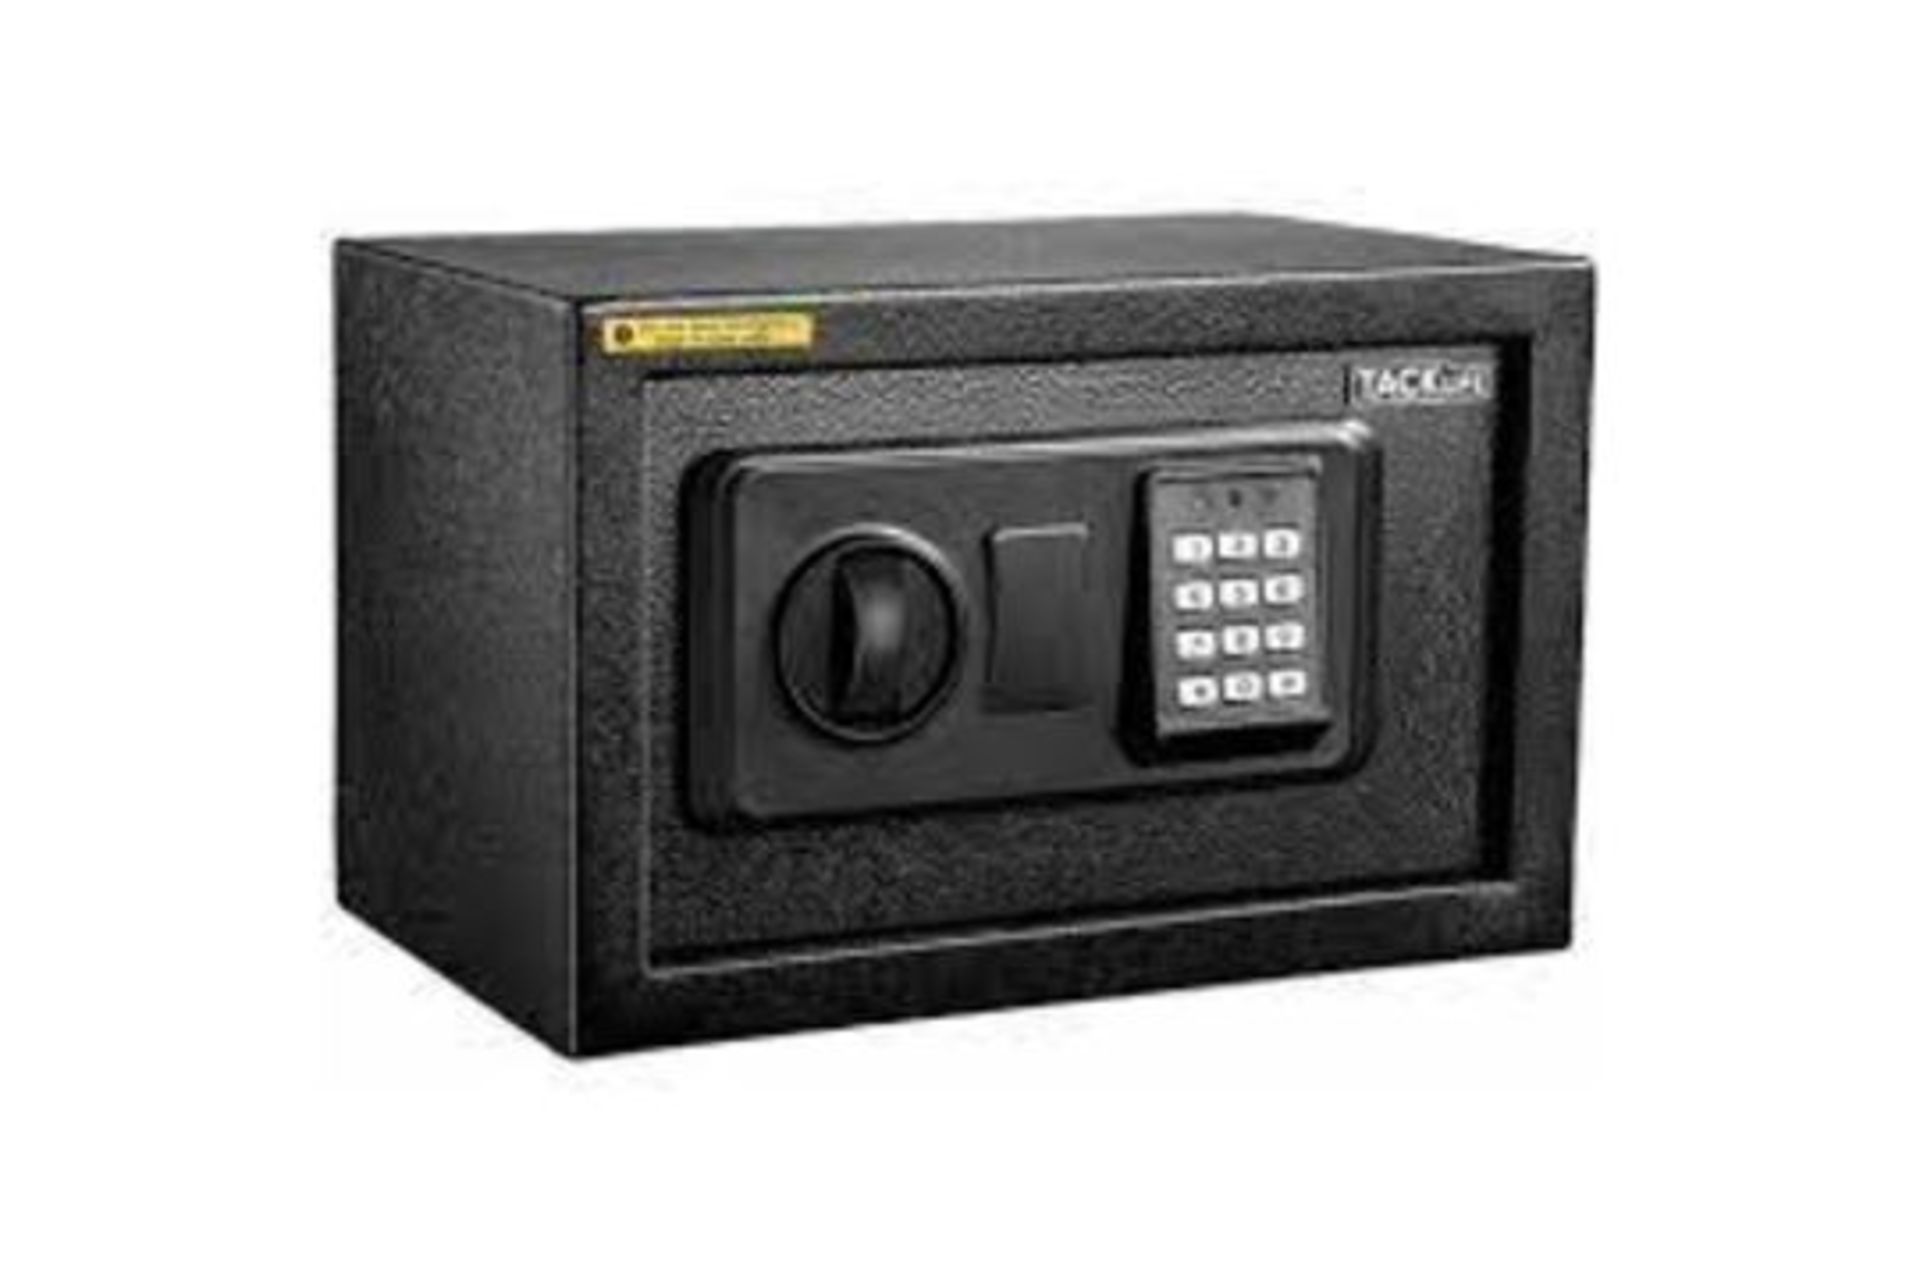 TRADE LOT 8 X NEW BOXED HEAVY DUTY 14L DIGITAL SAFE. (HES25A) ROW 15 Built from sturdy steel and